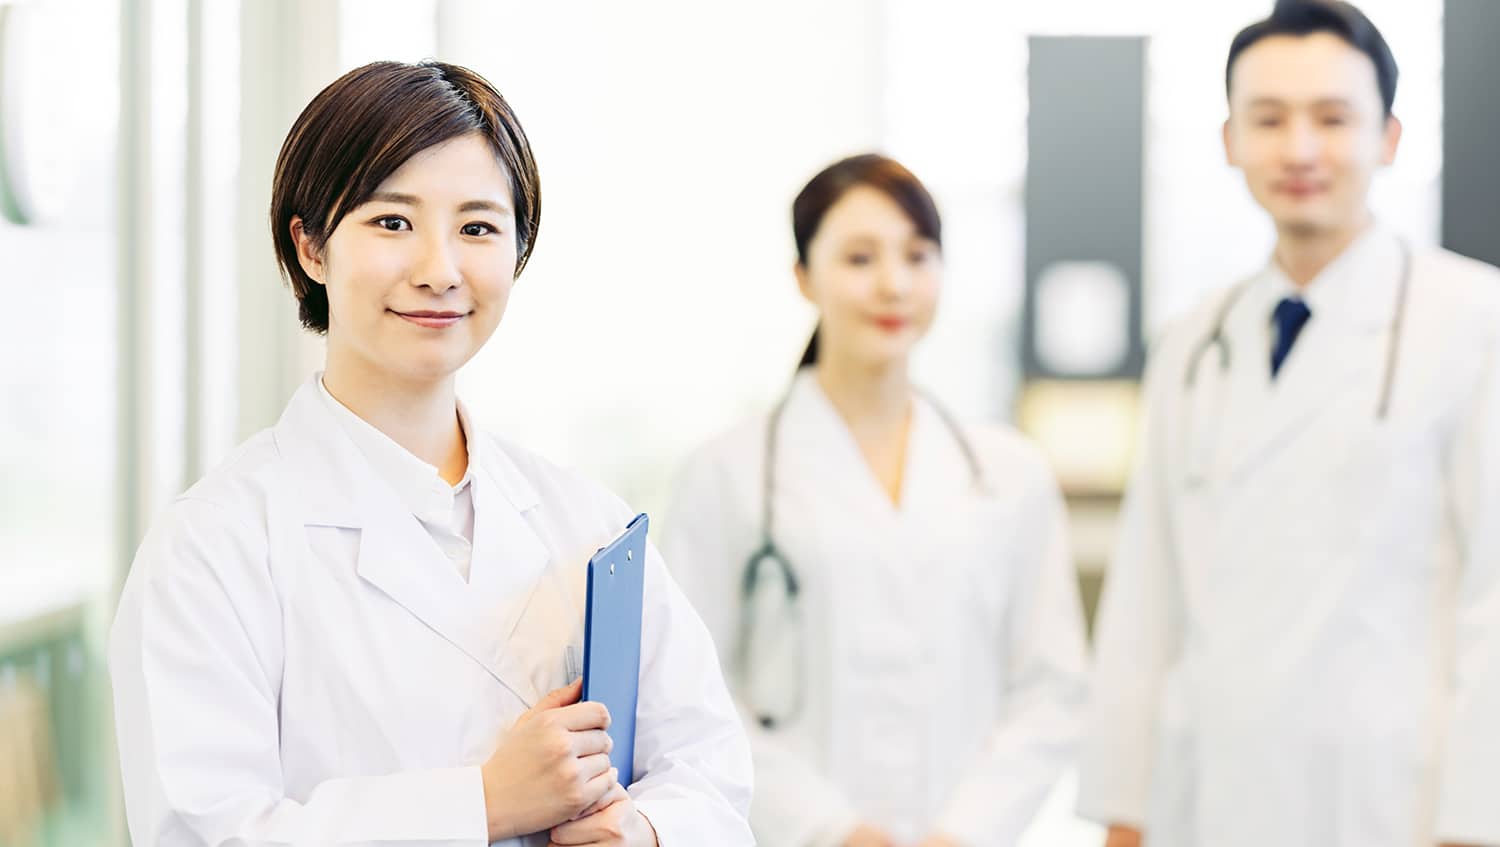 A group of Japanese health professionals